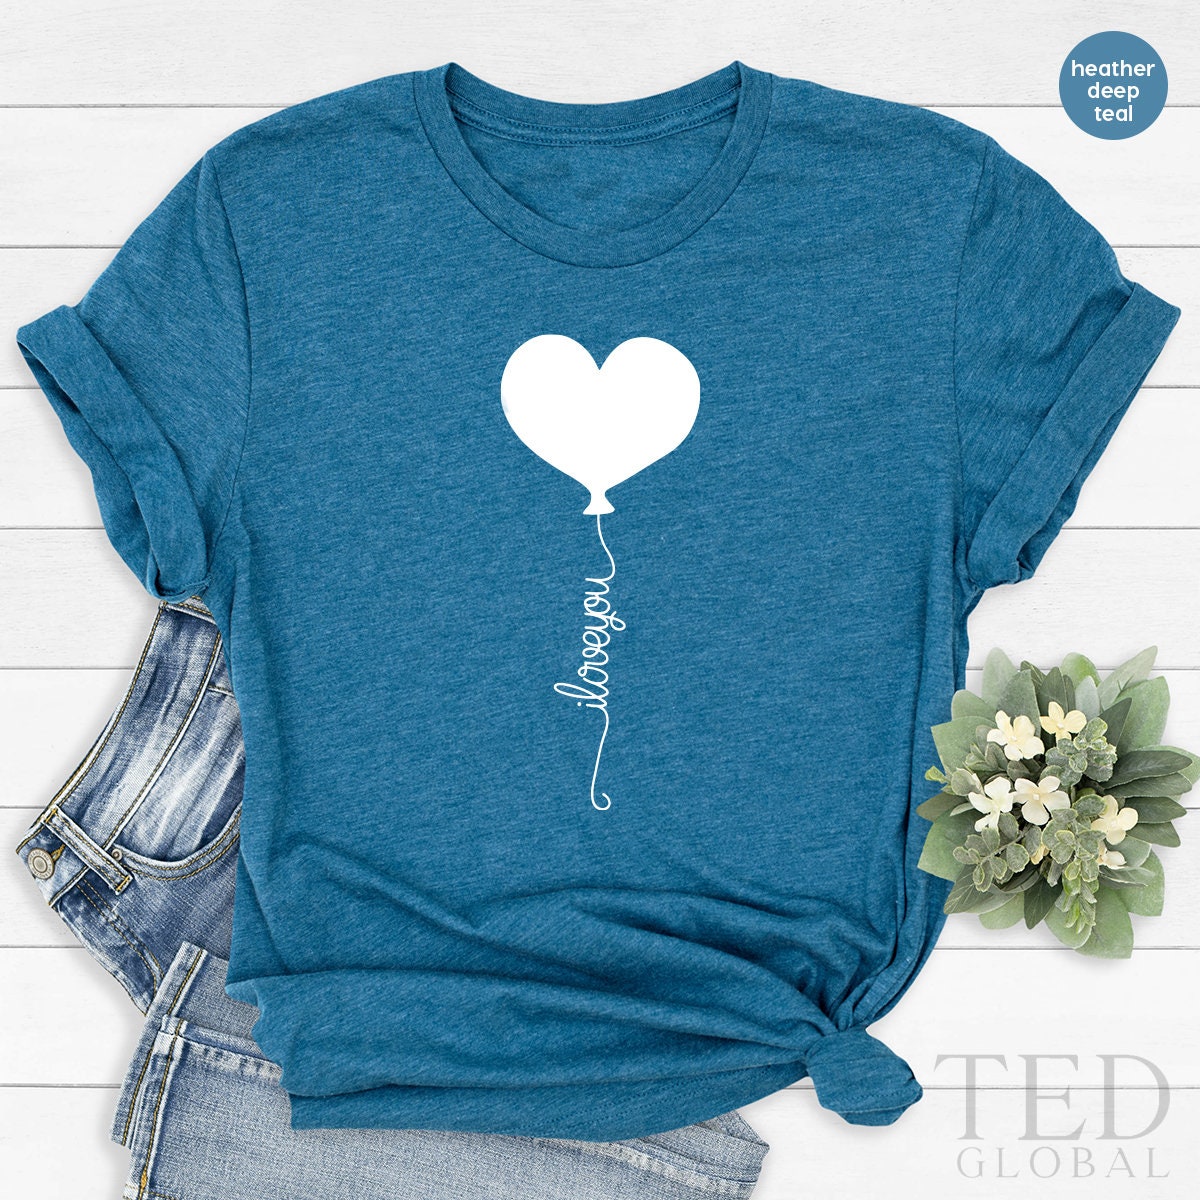 Love You Shirt,Valentines Day Shirt,Valentine Shirt,Valentines T Shirt,Couple Shirts,Hearts Ballon Tee,Shirt For Women,Valentines Day Gift - Fastdeliverytees.com